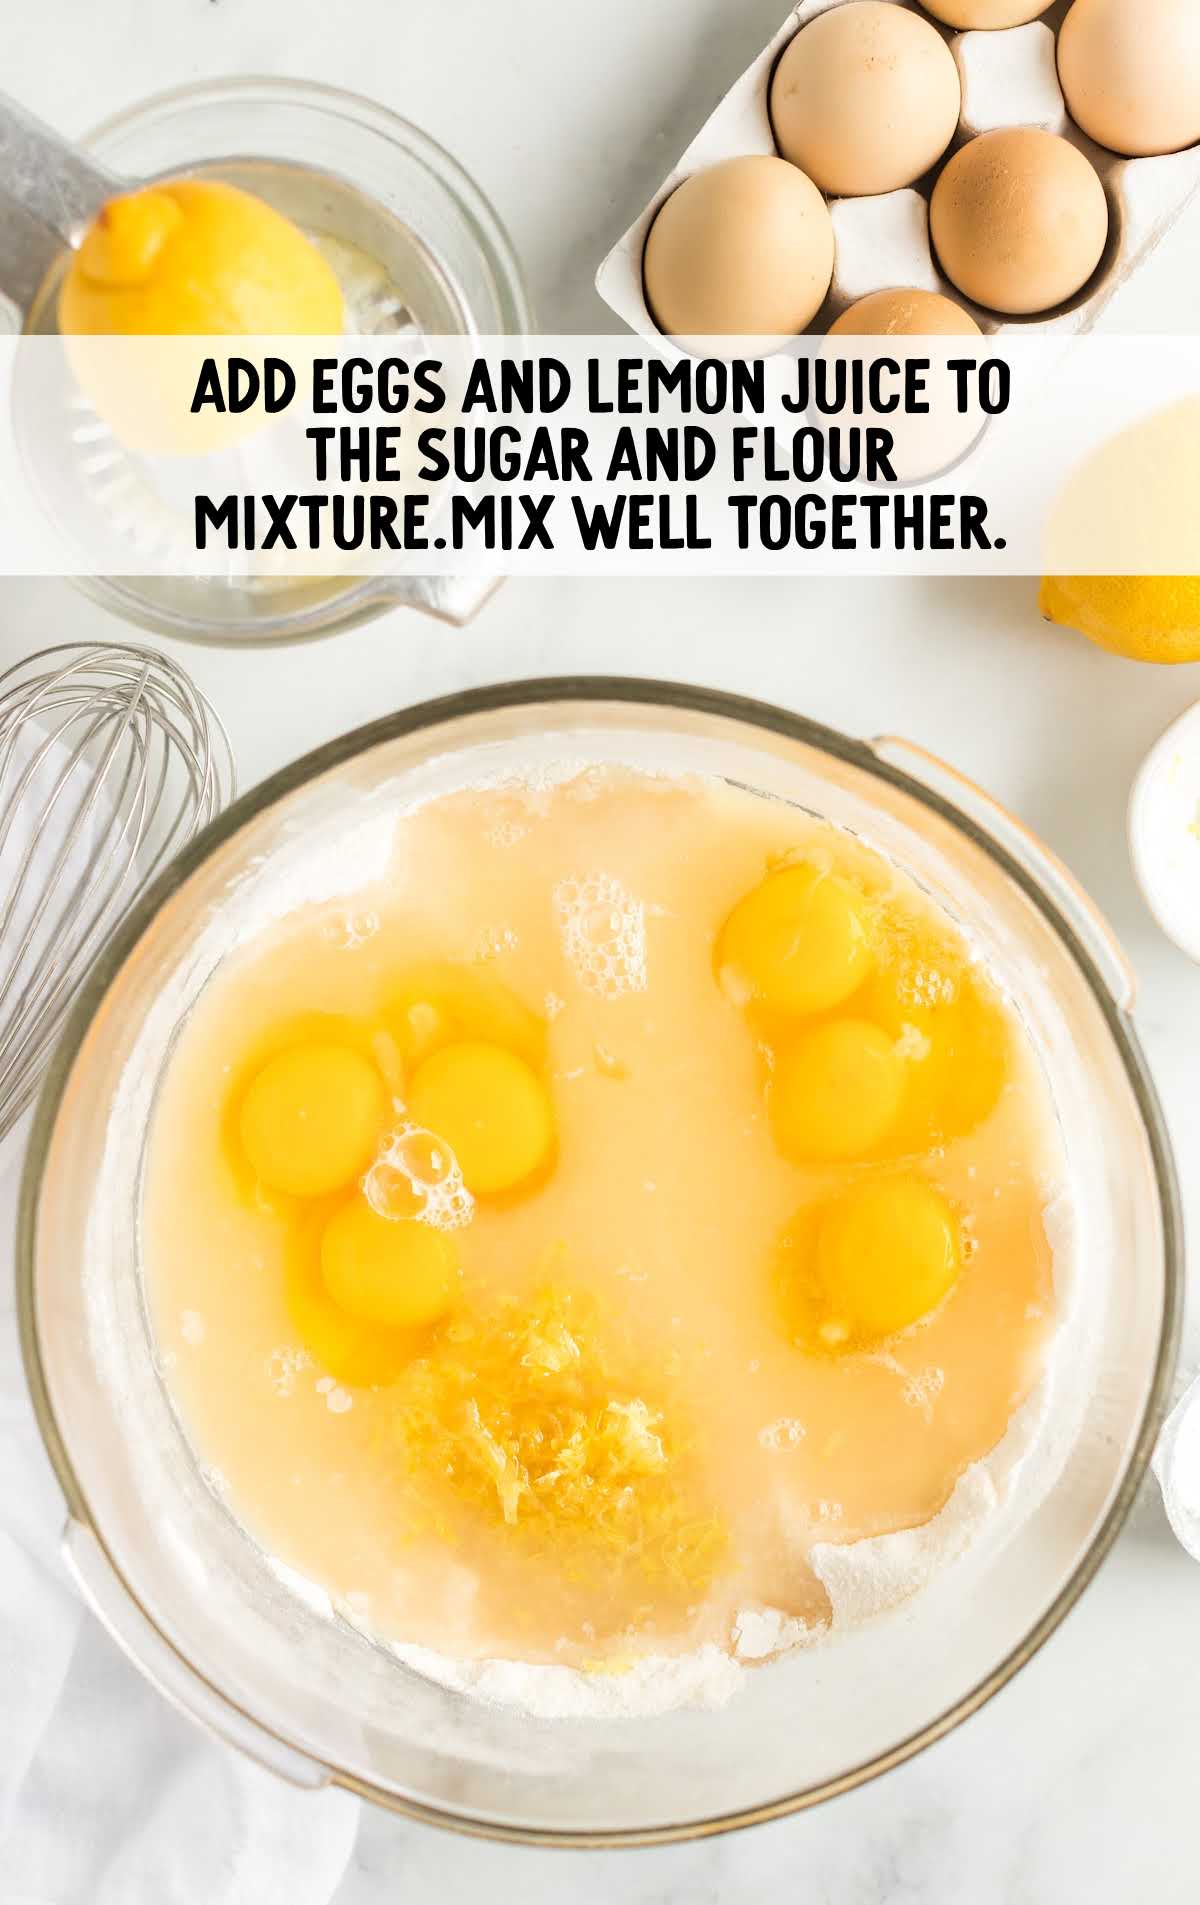 eggs and lemon juice added to the sugar mixture